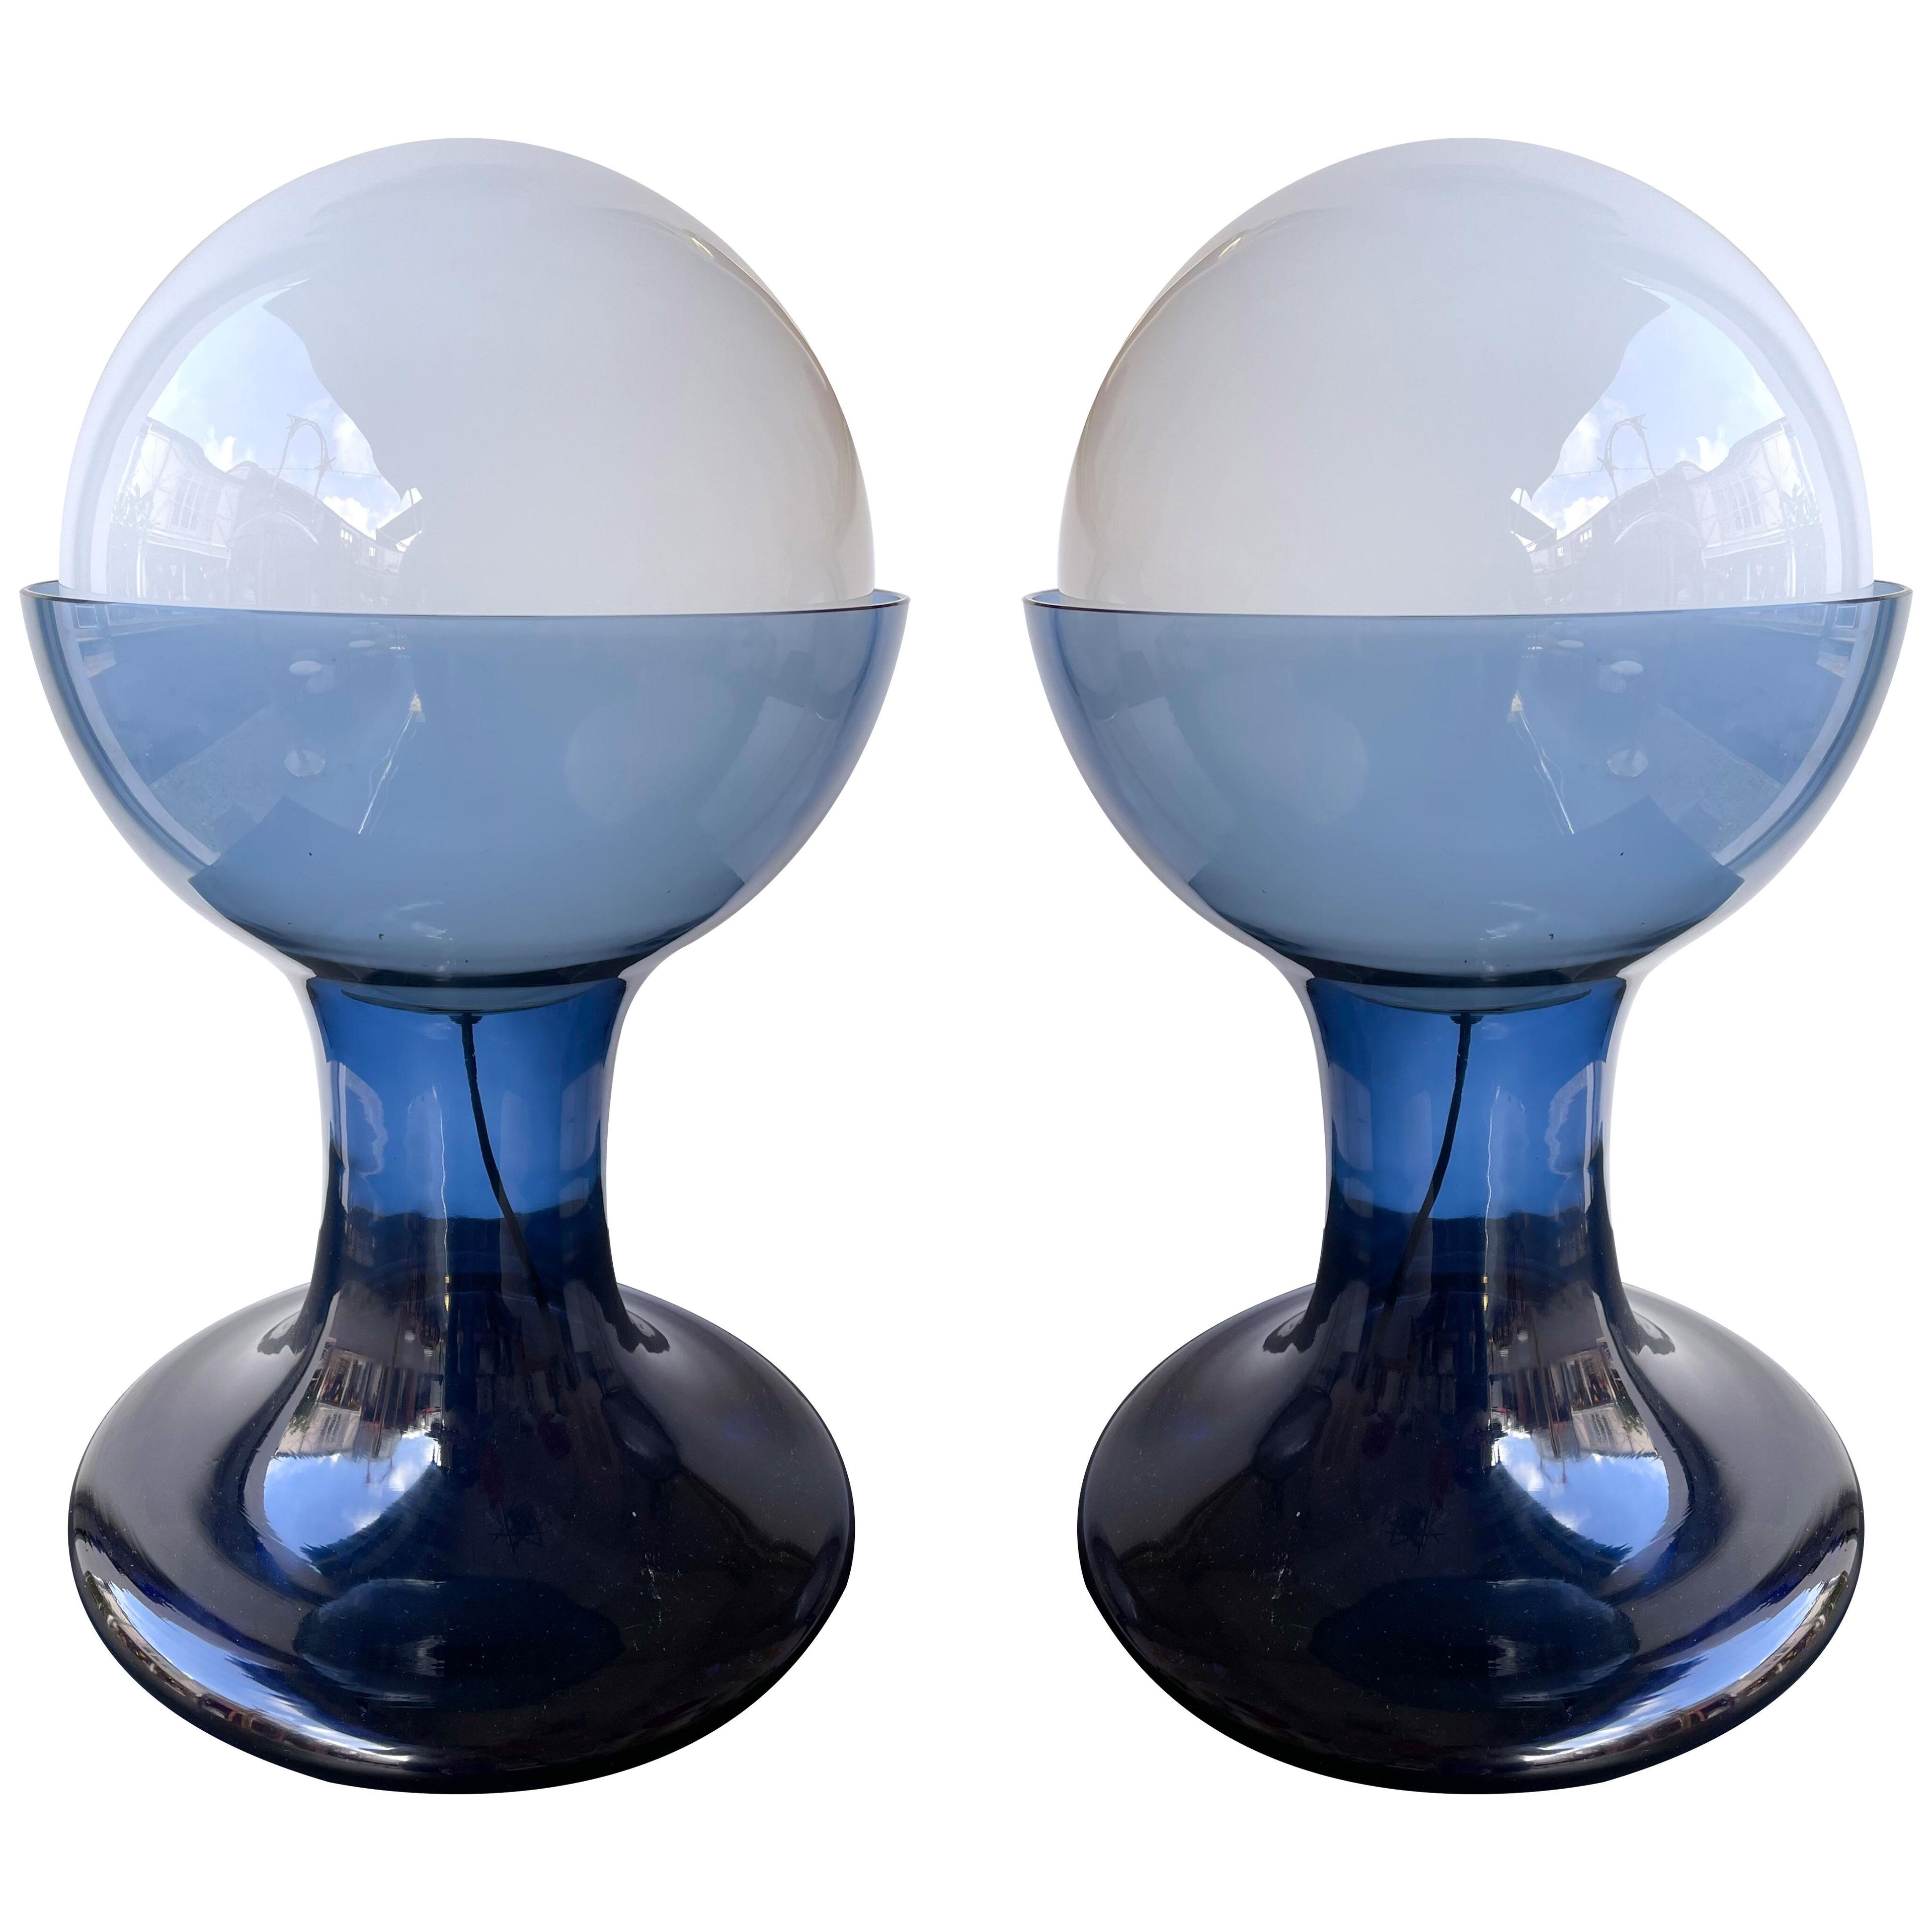 Pair of Blue Murano Glass Lamps LT216 by Carlo Nason for Mazzega. Italy, 1970s